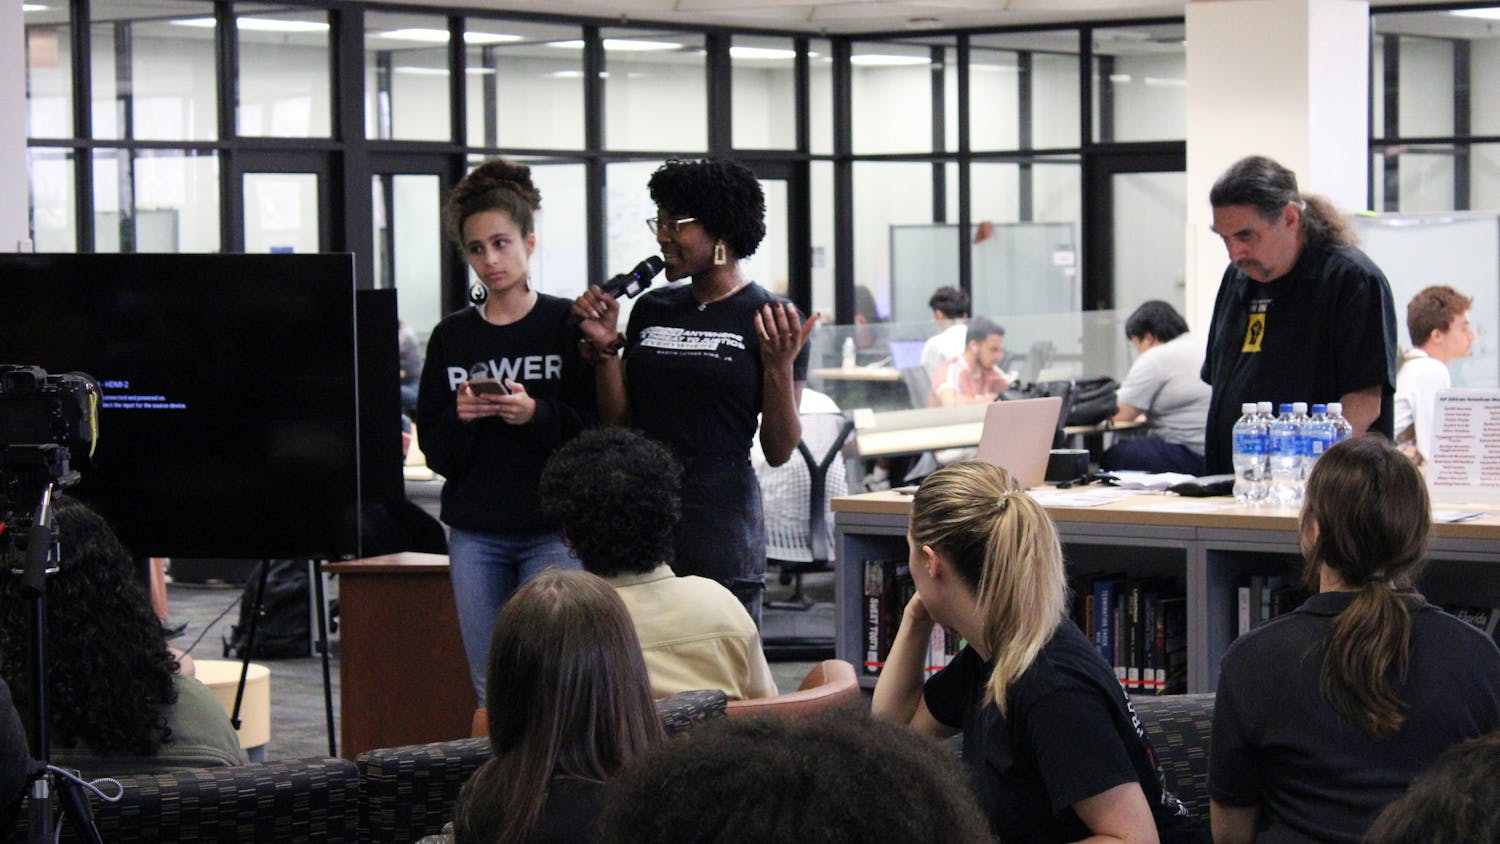 Sophia De La Cruz (left) and Krystin Anderson (right) speak to attendees at the Samuel Proctor Oral History Program’s teach-in session about black history and intellectual freedom in Marston Science Library Thursday, February 23, 2023.